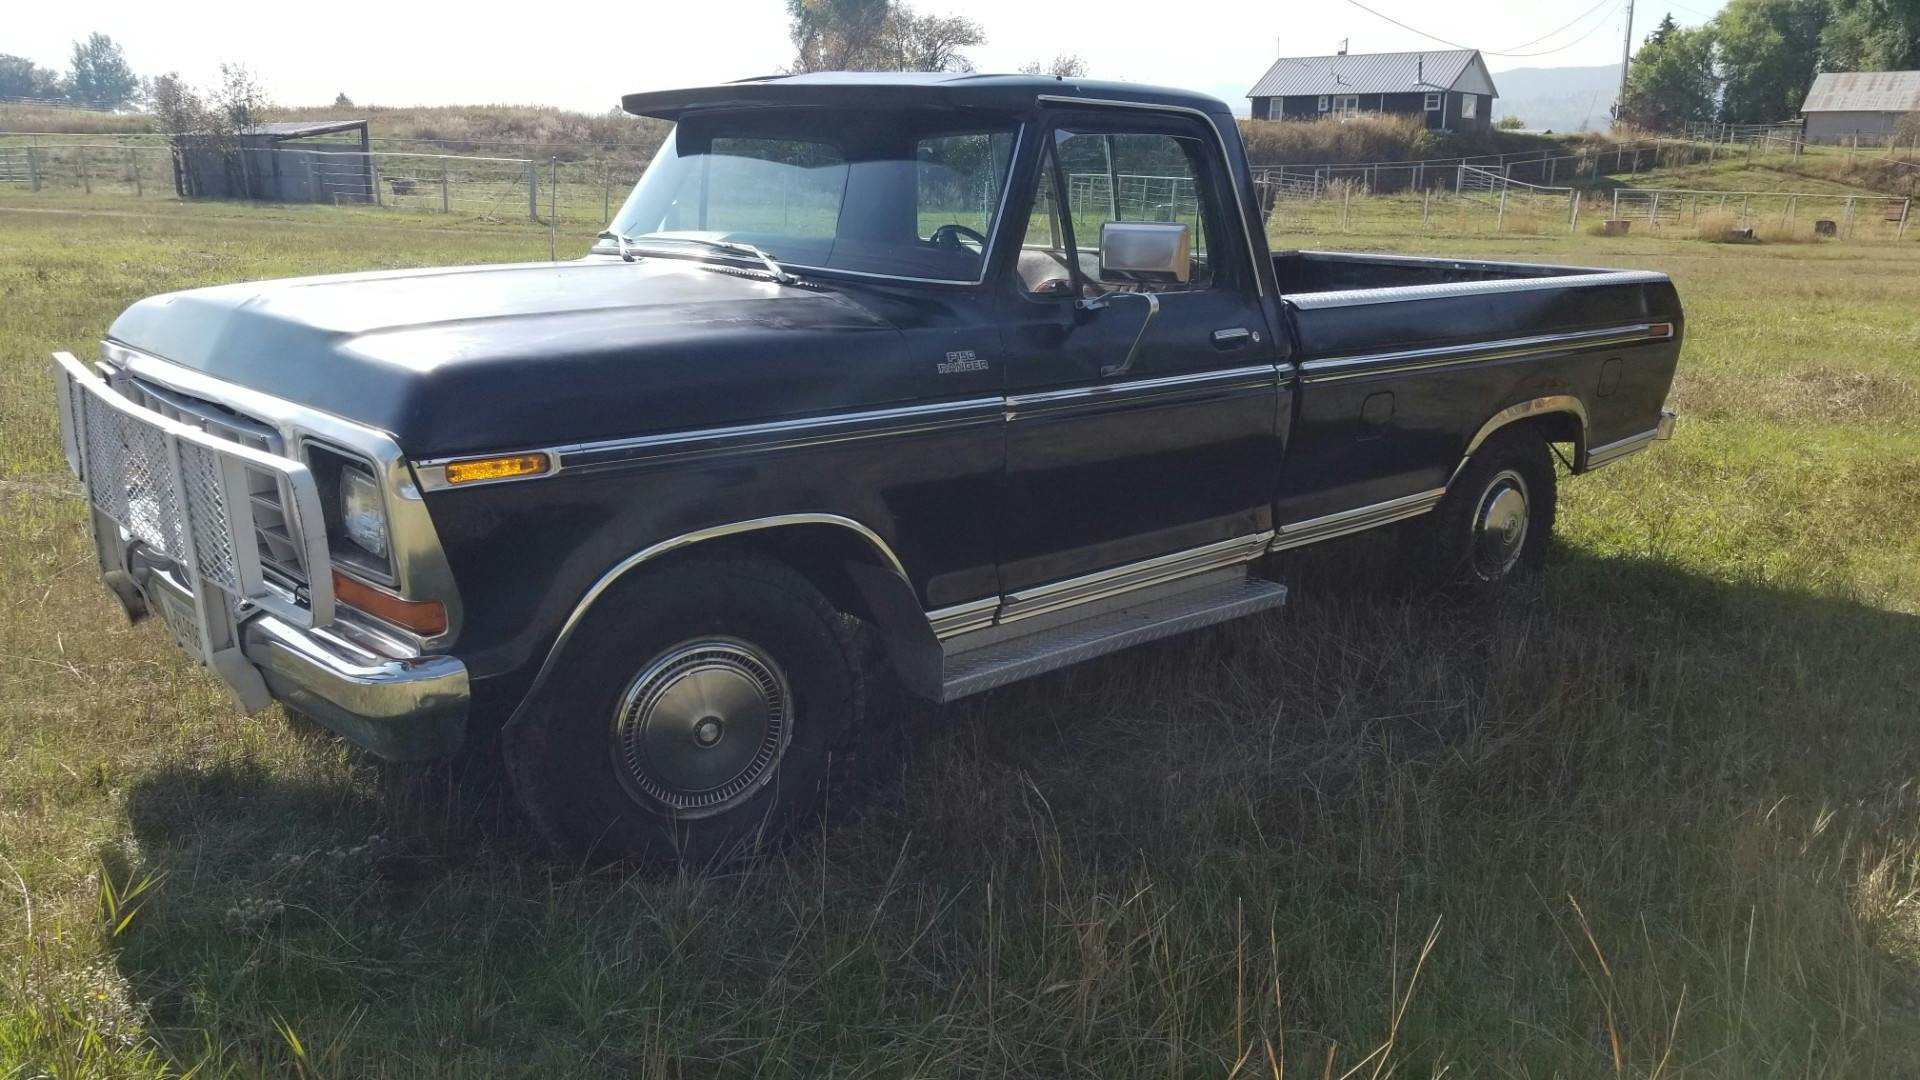 Ford-F150-1978-2024-02-23T16:09:34.738Z